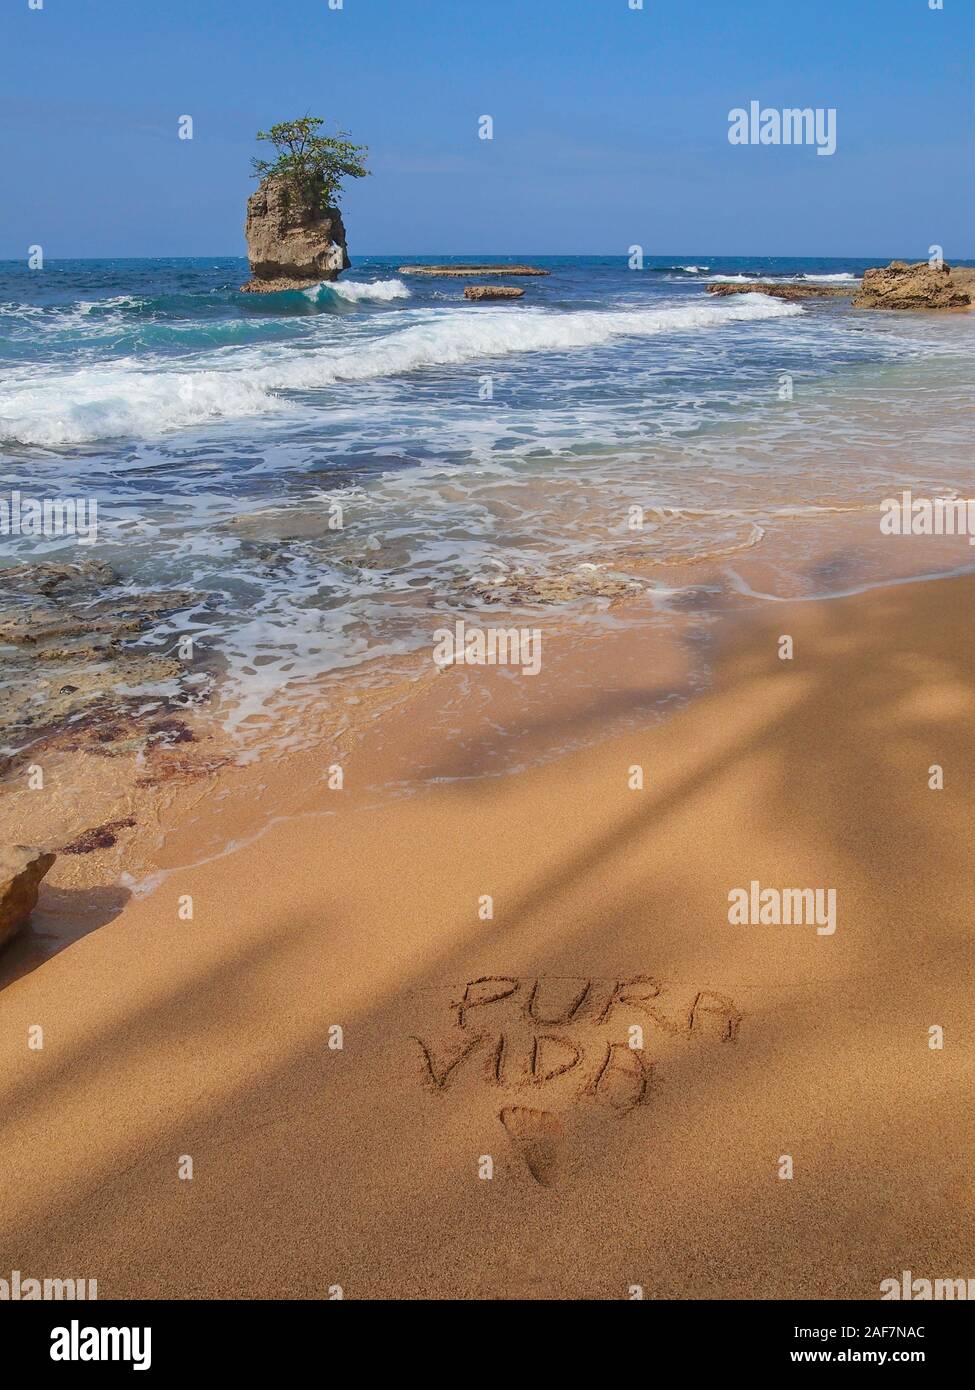 Tropical sea shore with a rocky islet and the words 'PURA VIDA' written in the sand, Caribbean coast of Costa Rica, Central America Stock Photo